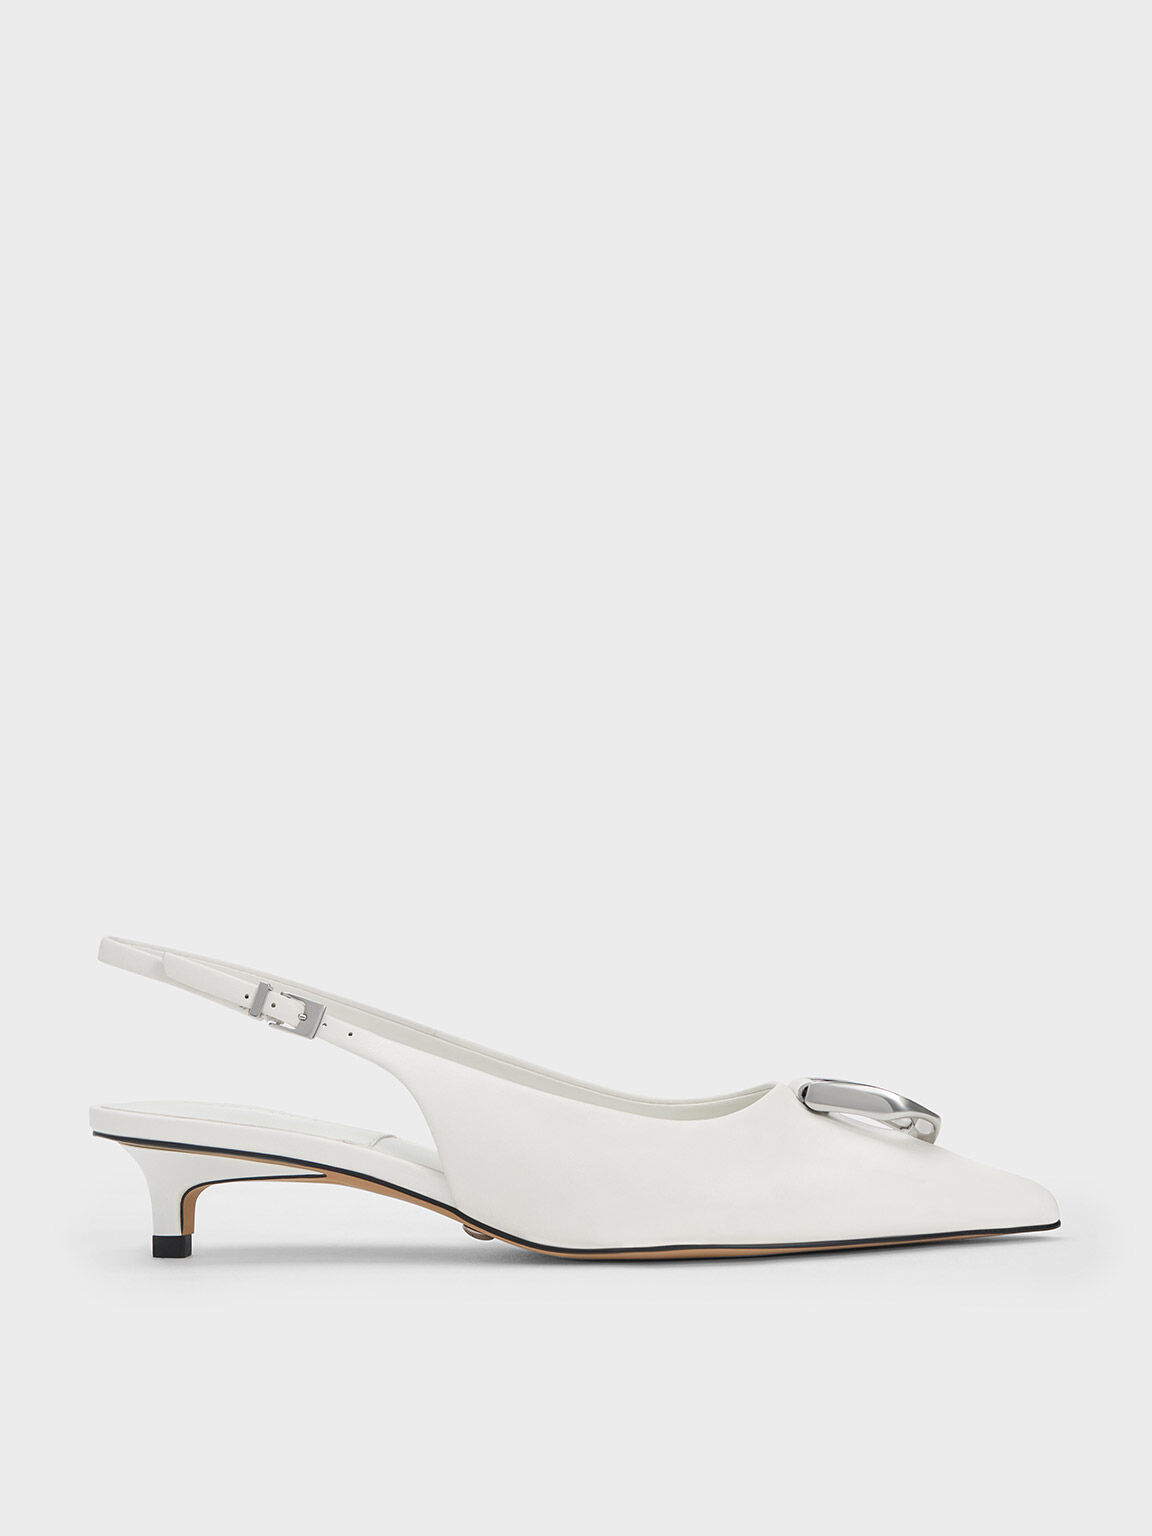 Charles & Keith Women's Pearl Embellished Slingback Pumps